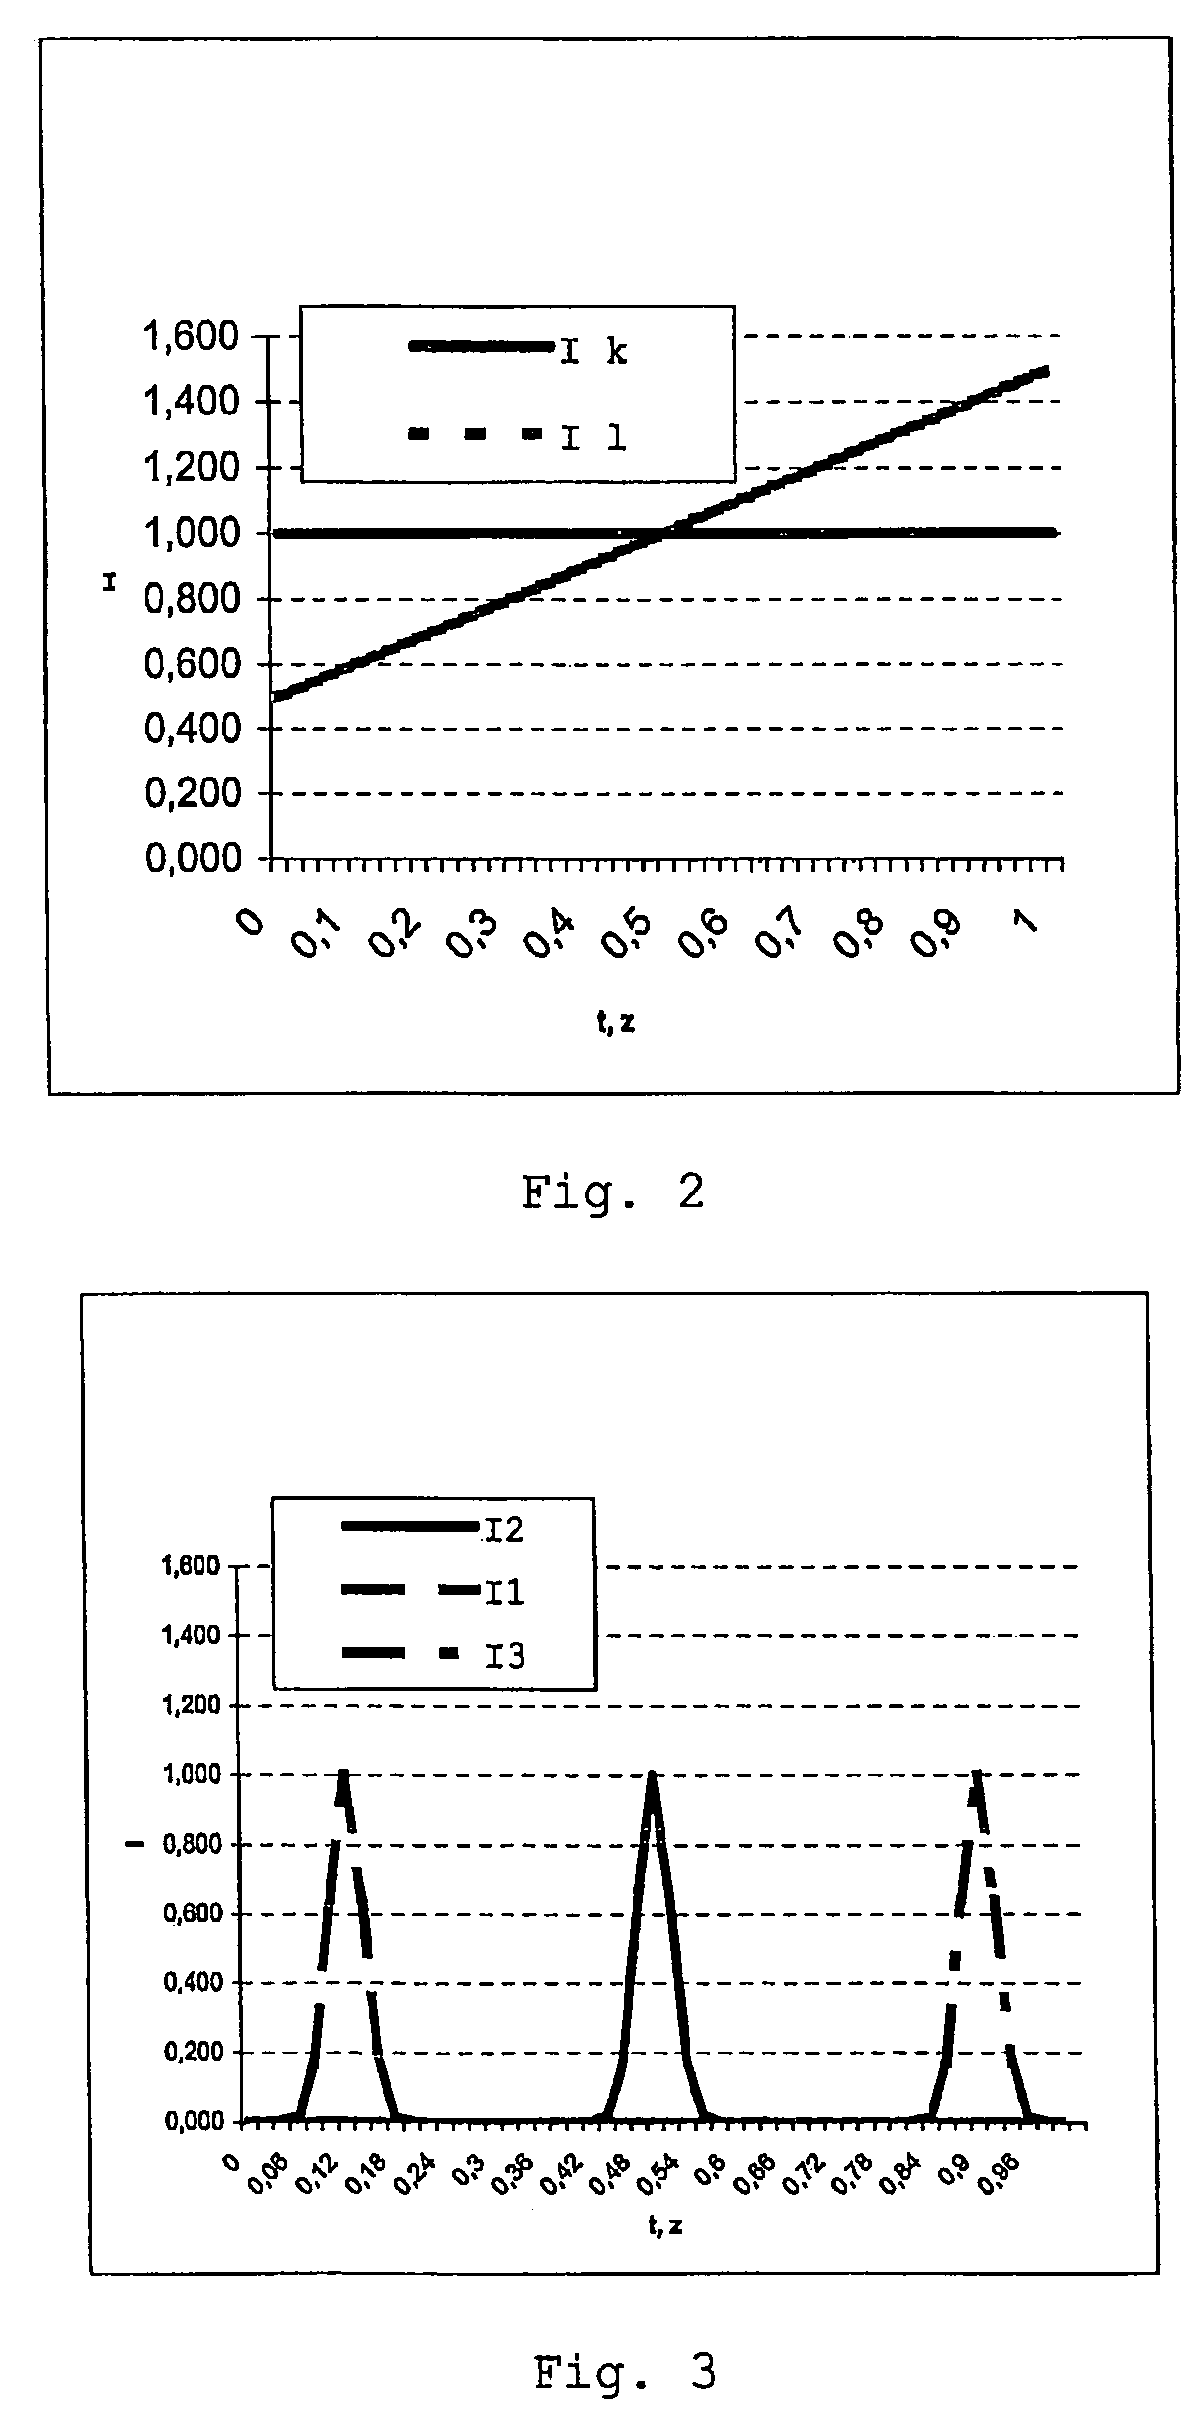 Measuring device and method that operates according to the basic principles of confocal microscopy